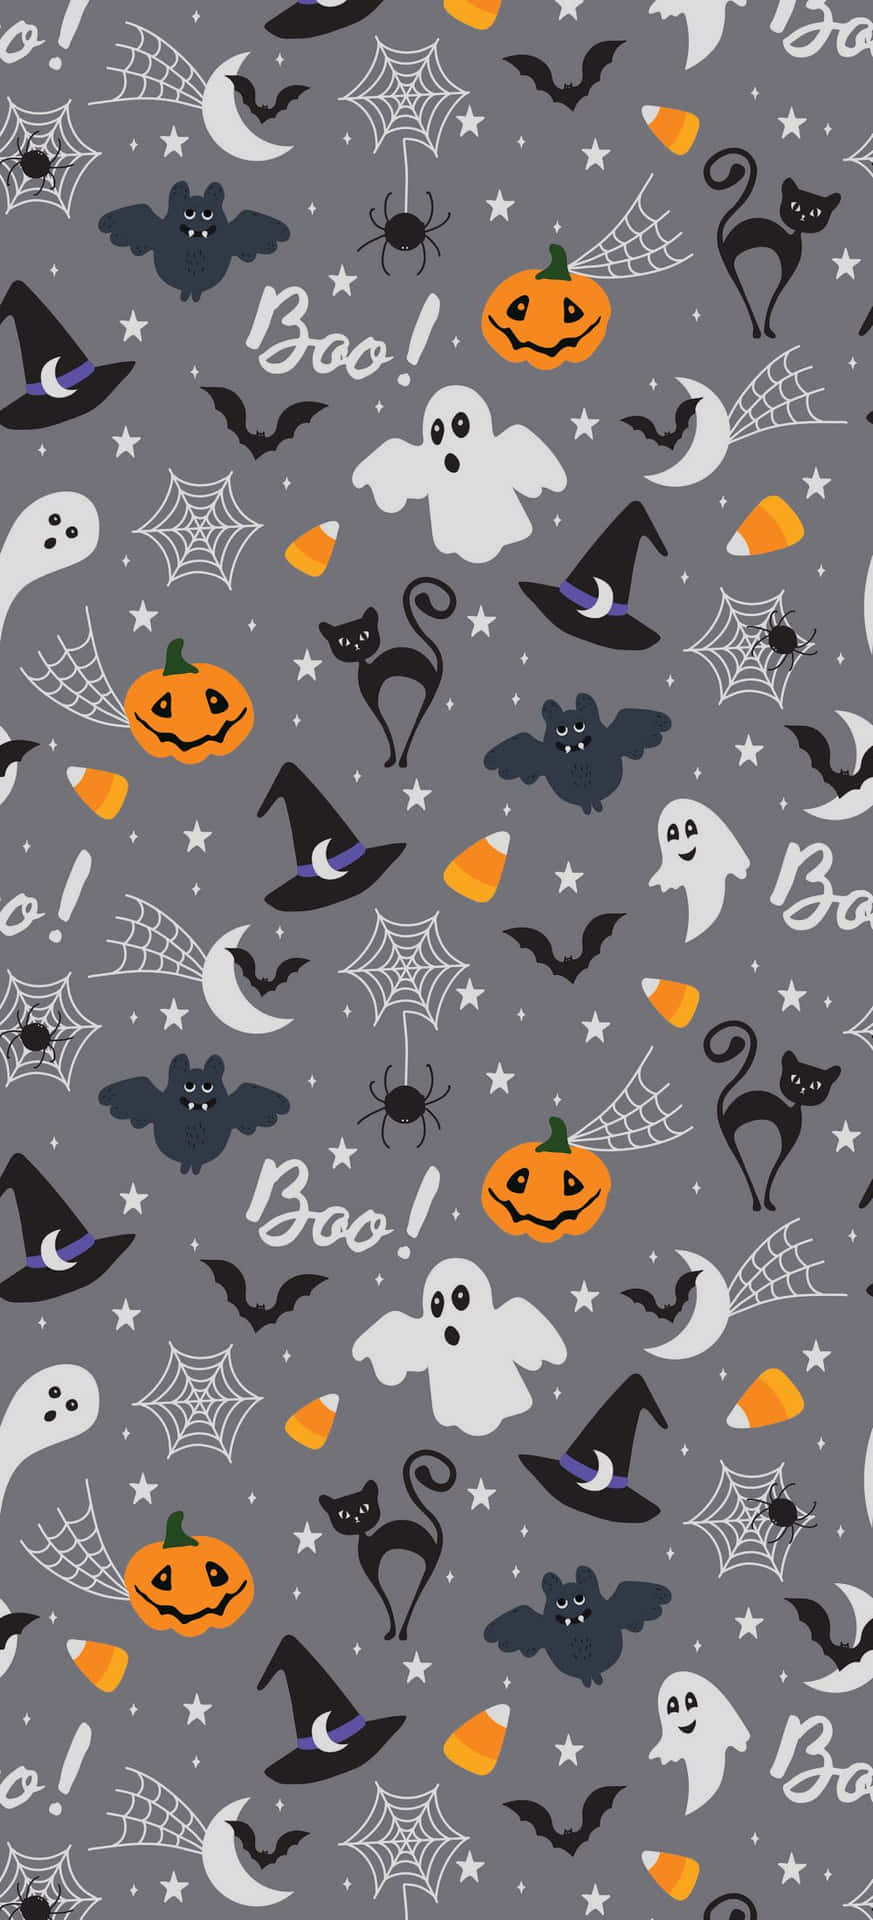 Celebrate Halloween with this adorable iPhone background